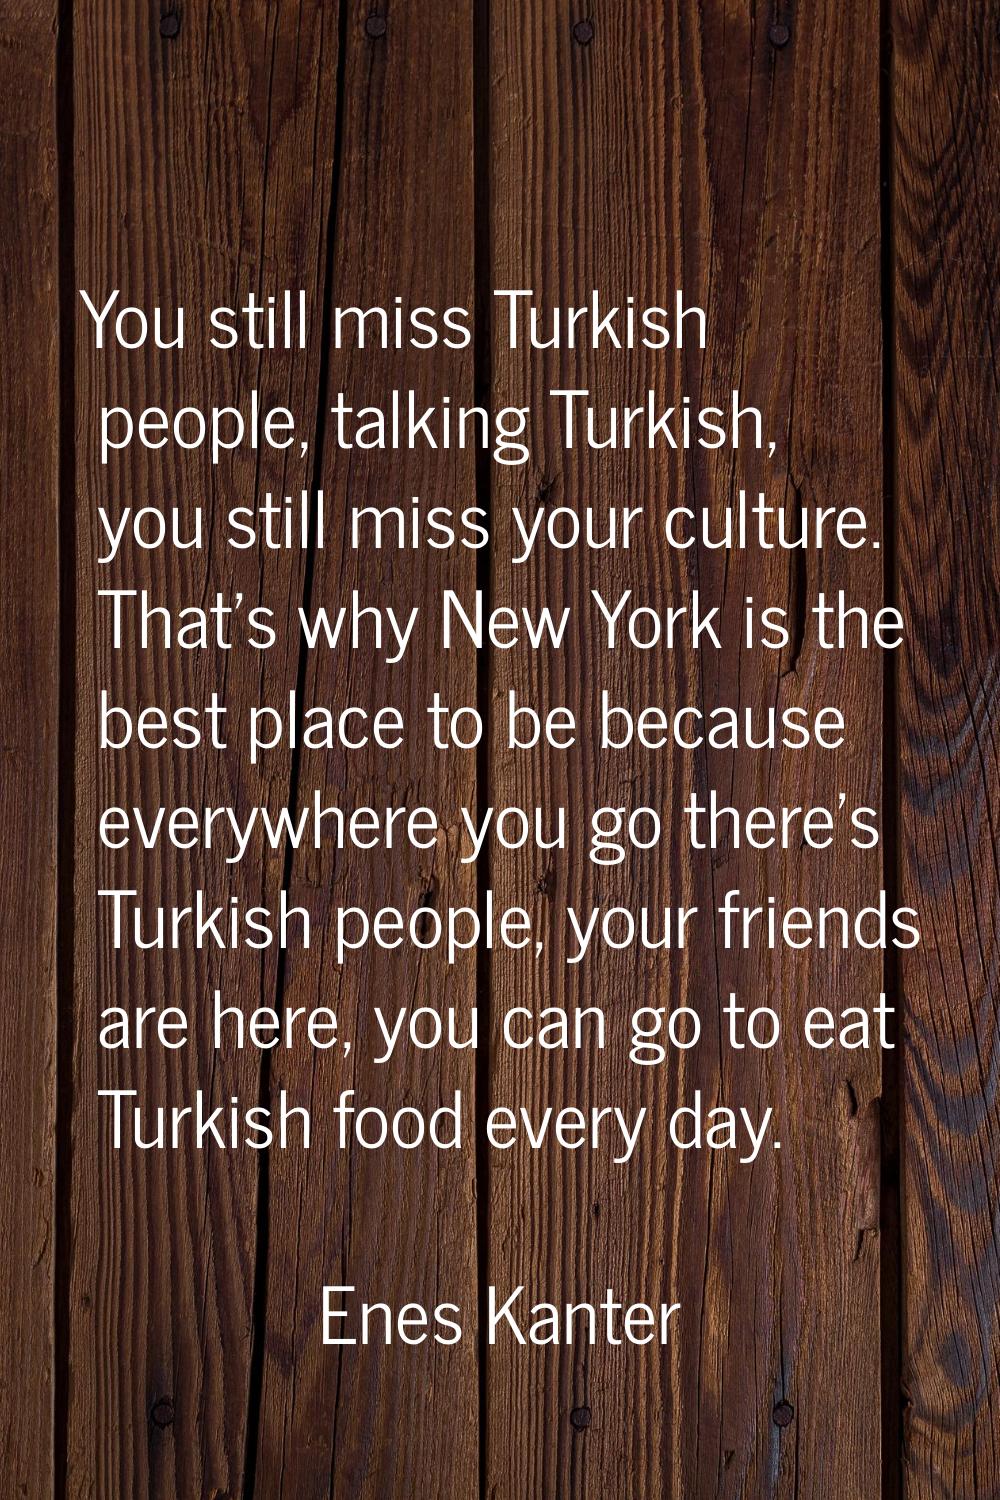 You still miss Turkish people, talking Turkish, you still miss your culture. That's why New York is